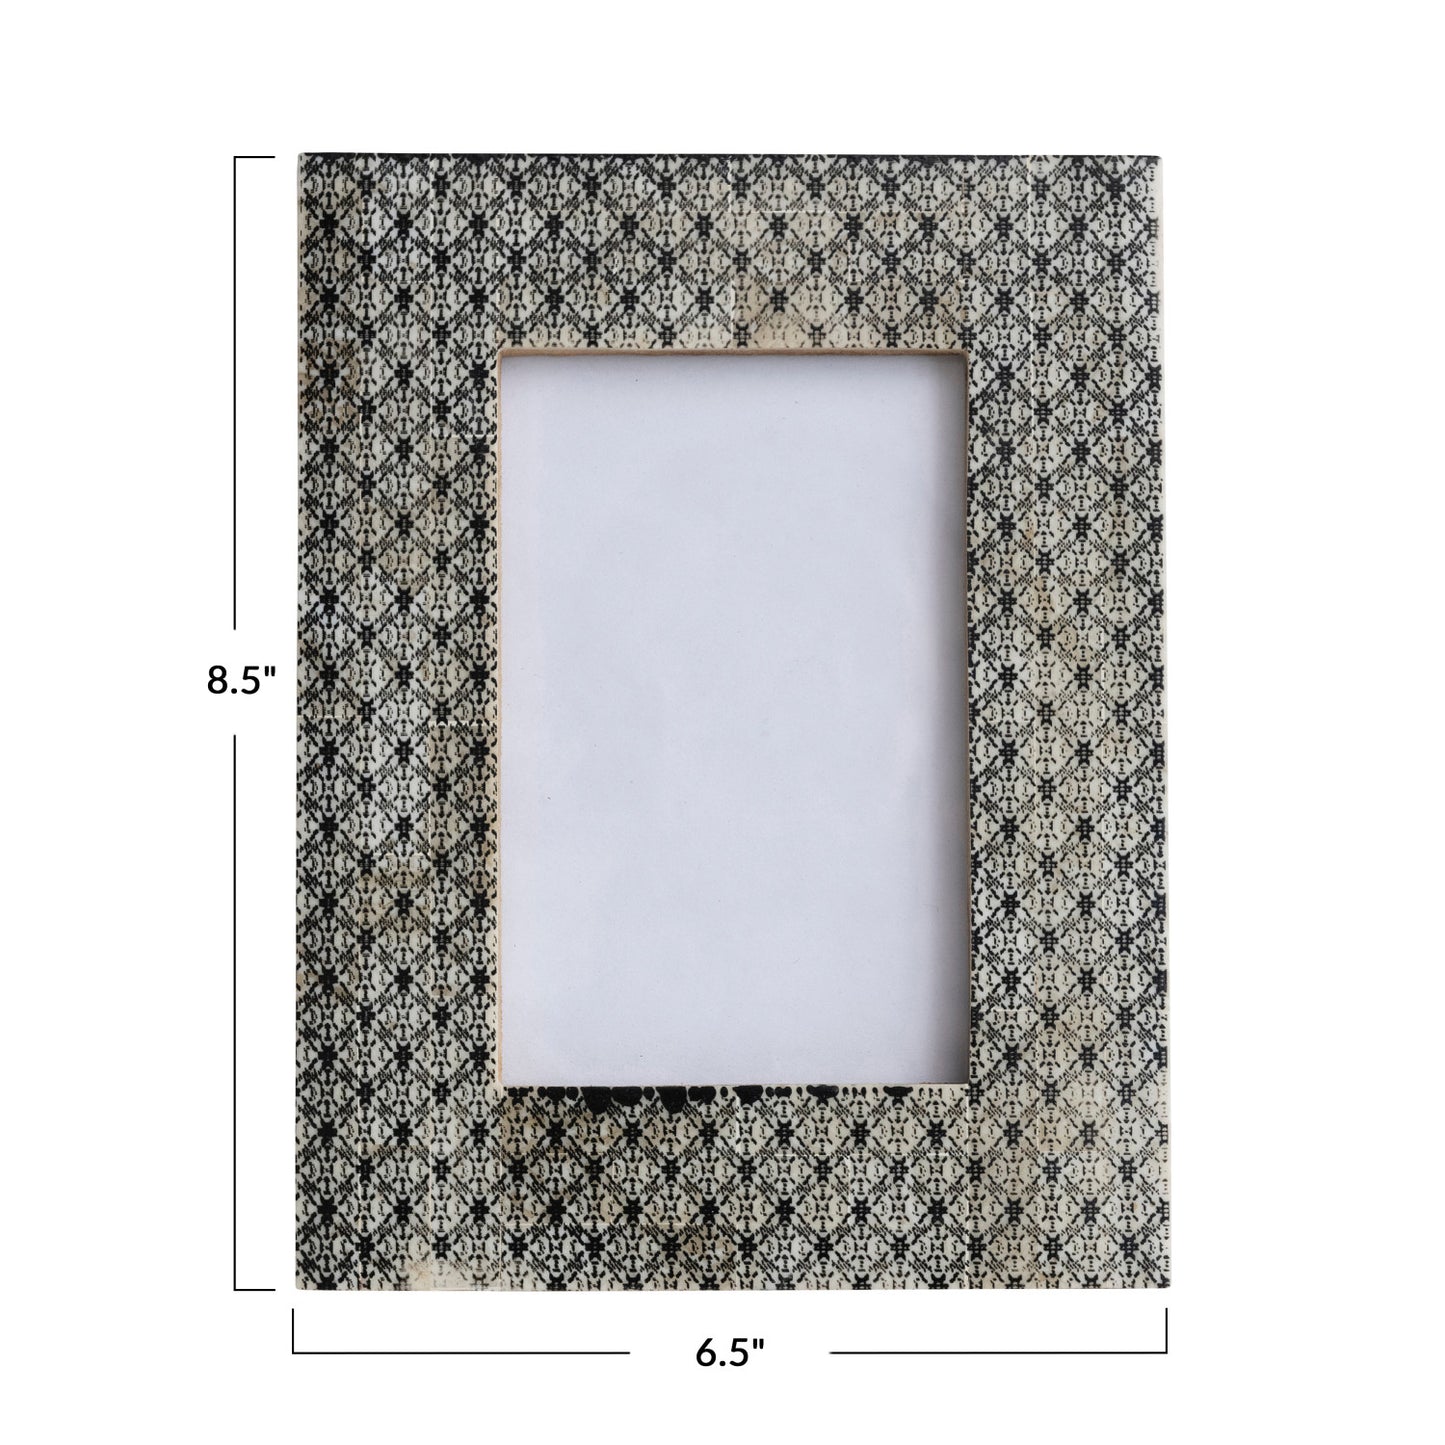 Resin & Glass Photo Frame w/ Pattern, Charcoal Color (Holds 4" x 6" Photo)